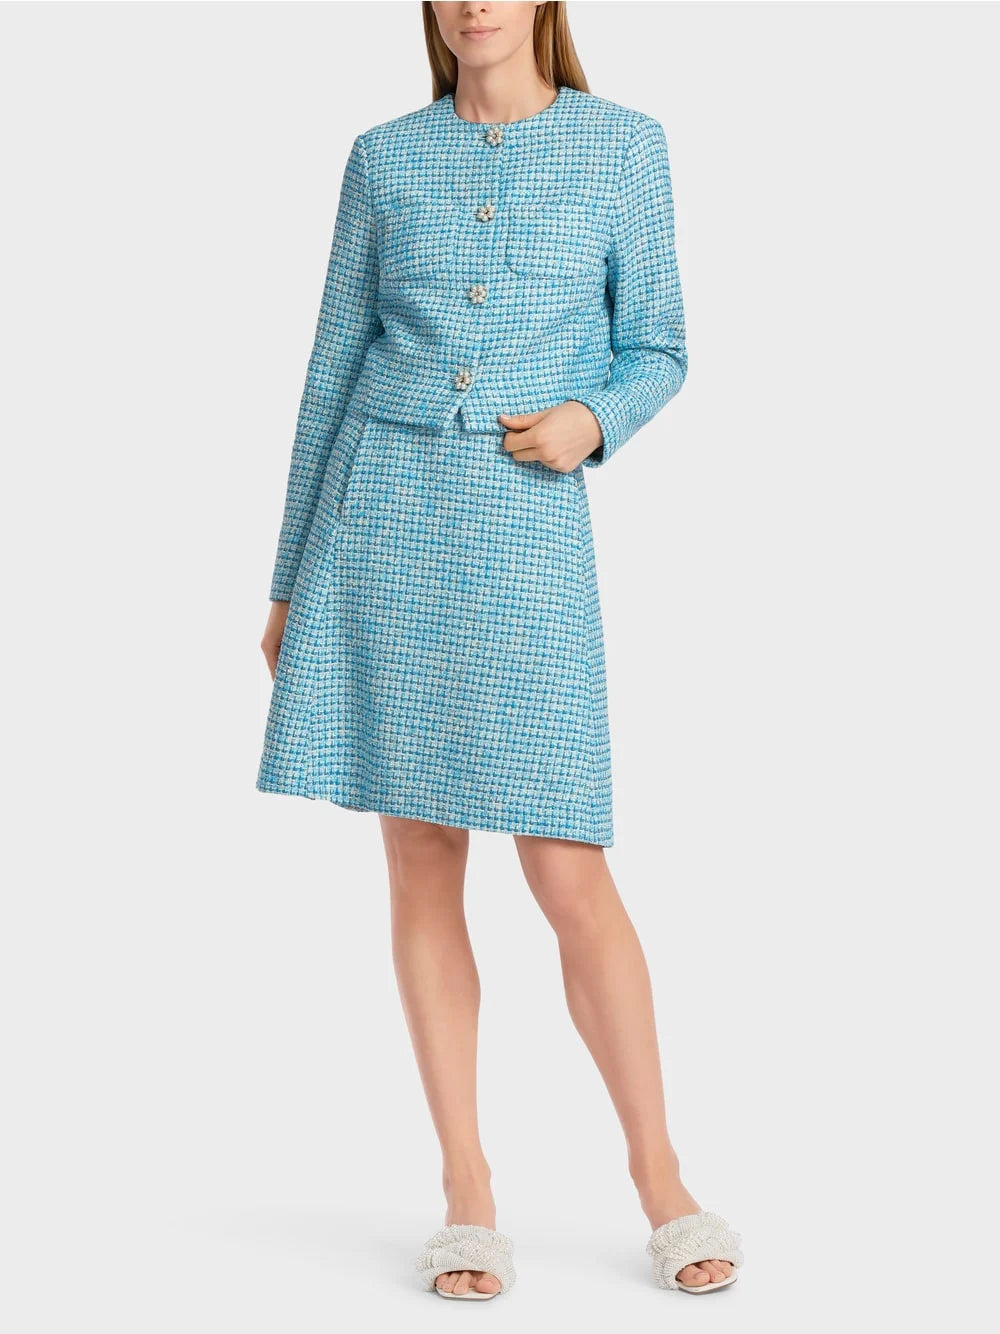 Marc Cain Blue Tweed Jacket with pearl buttons